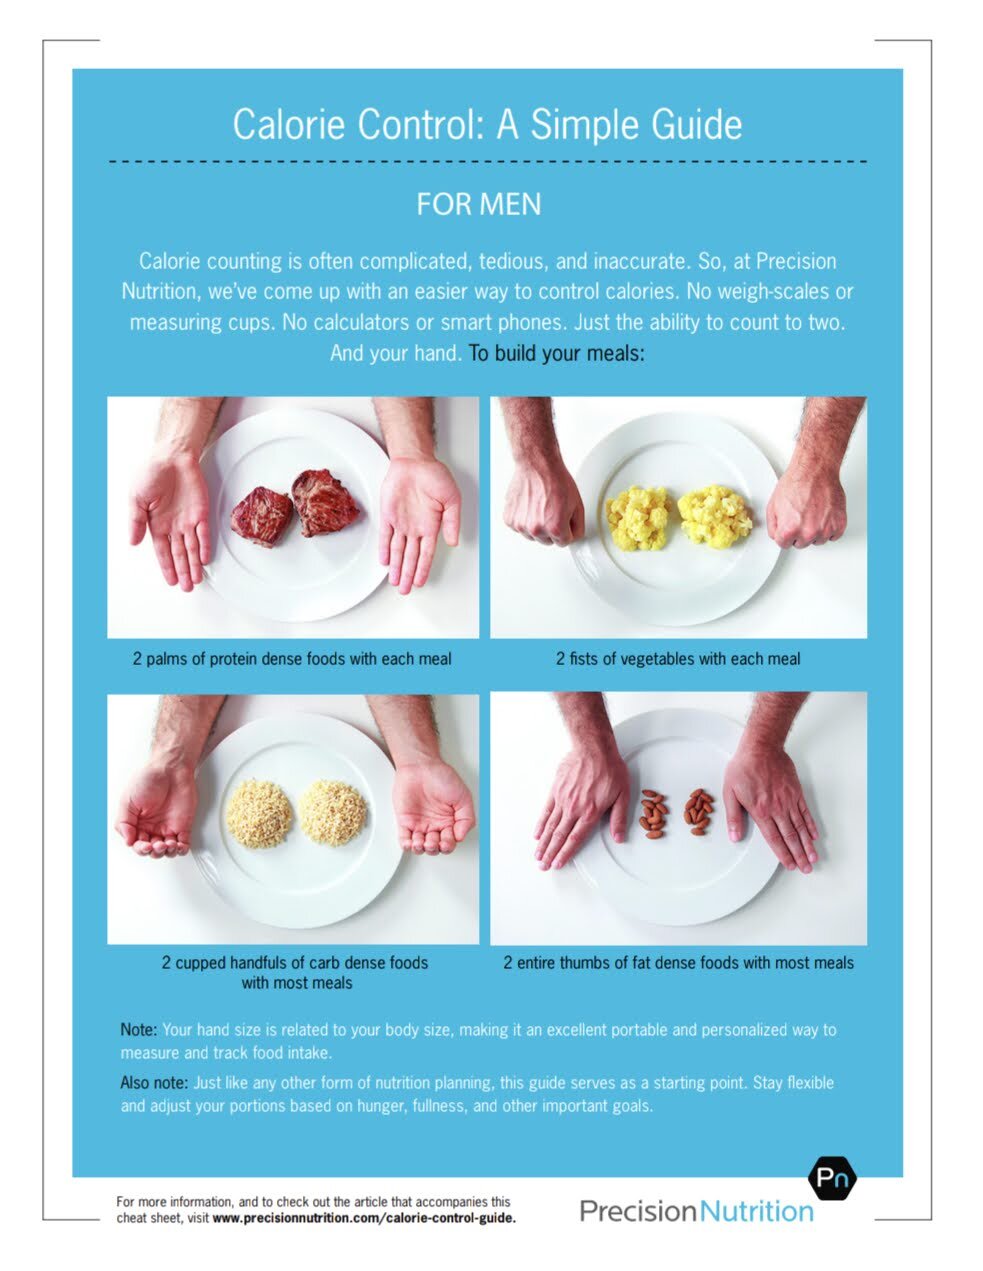 Infographic showing portion sizes for men using hands as a guide.